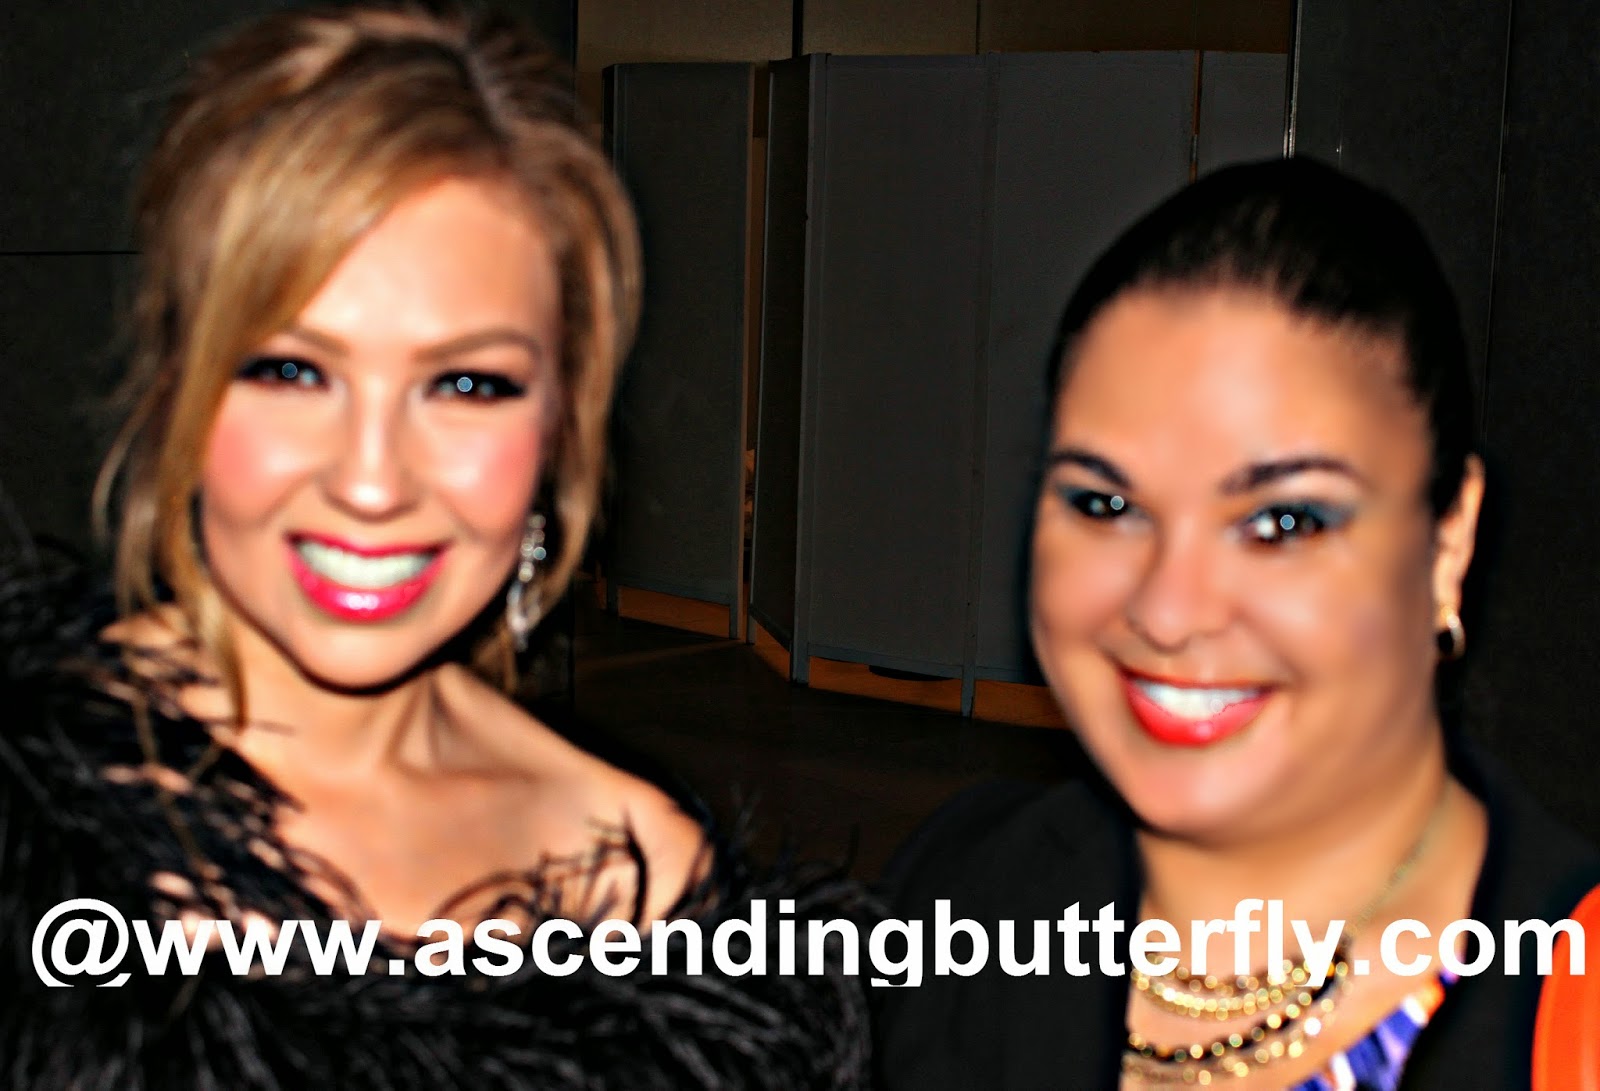 Ascending Butterfly meets Actress/Songstress Thalia Cosmopolitan for Latinas Fun Fearless Awards 2014 in New York City